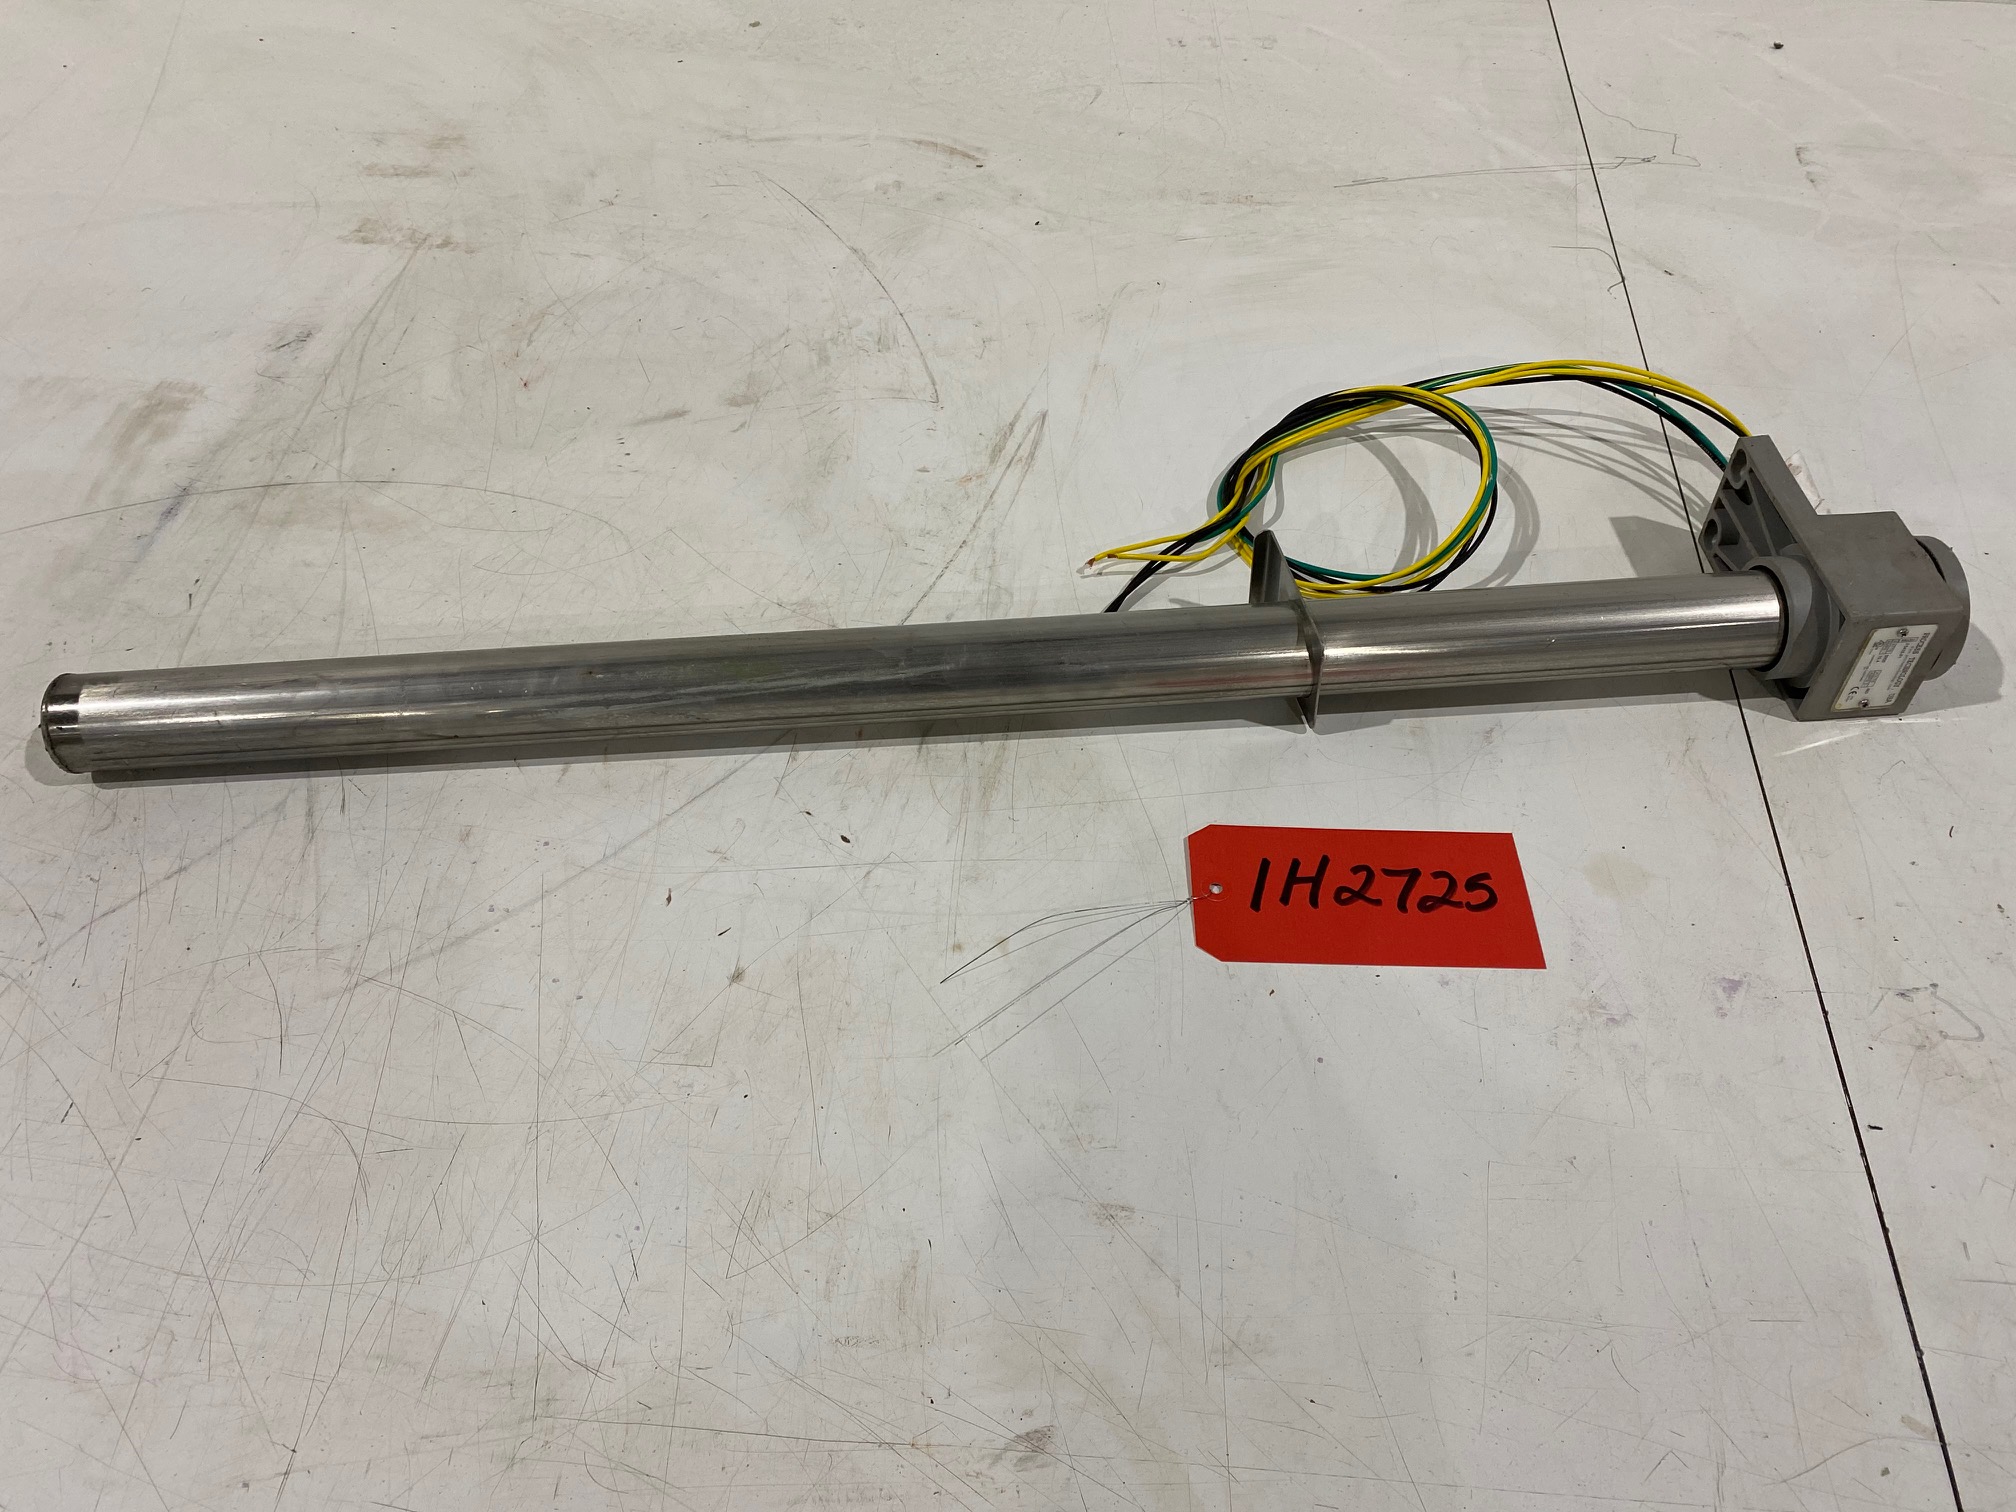 Used Immersion Heater - Process Technology Stainless Steel Immersion Heater IH2725-Immersion Heater